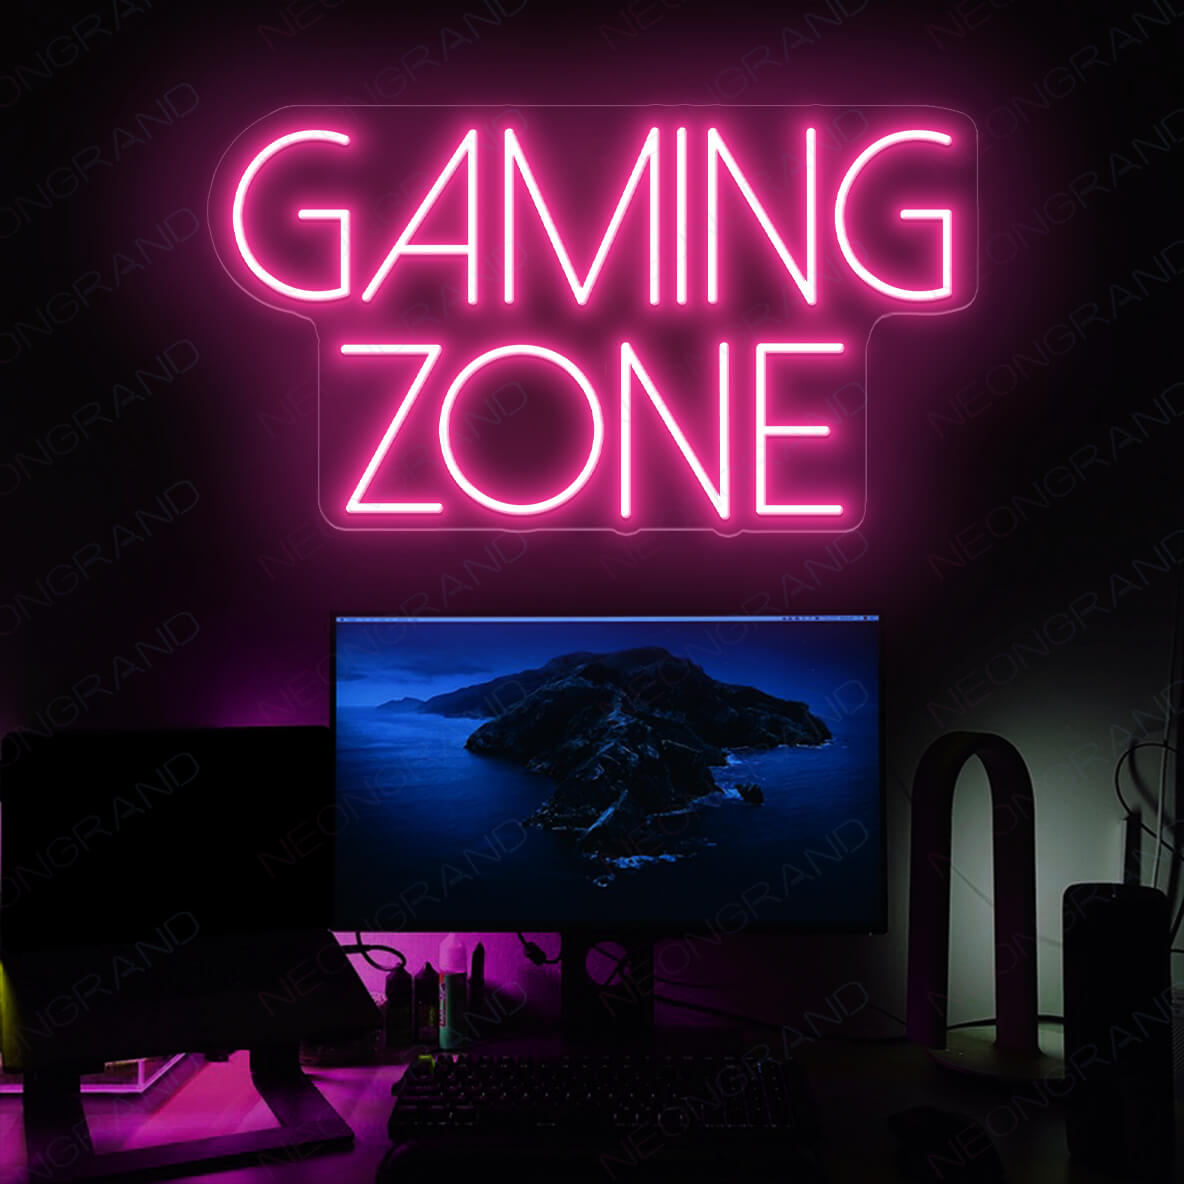 Gaming Zone Neon Sign Game Room Led Light pink